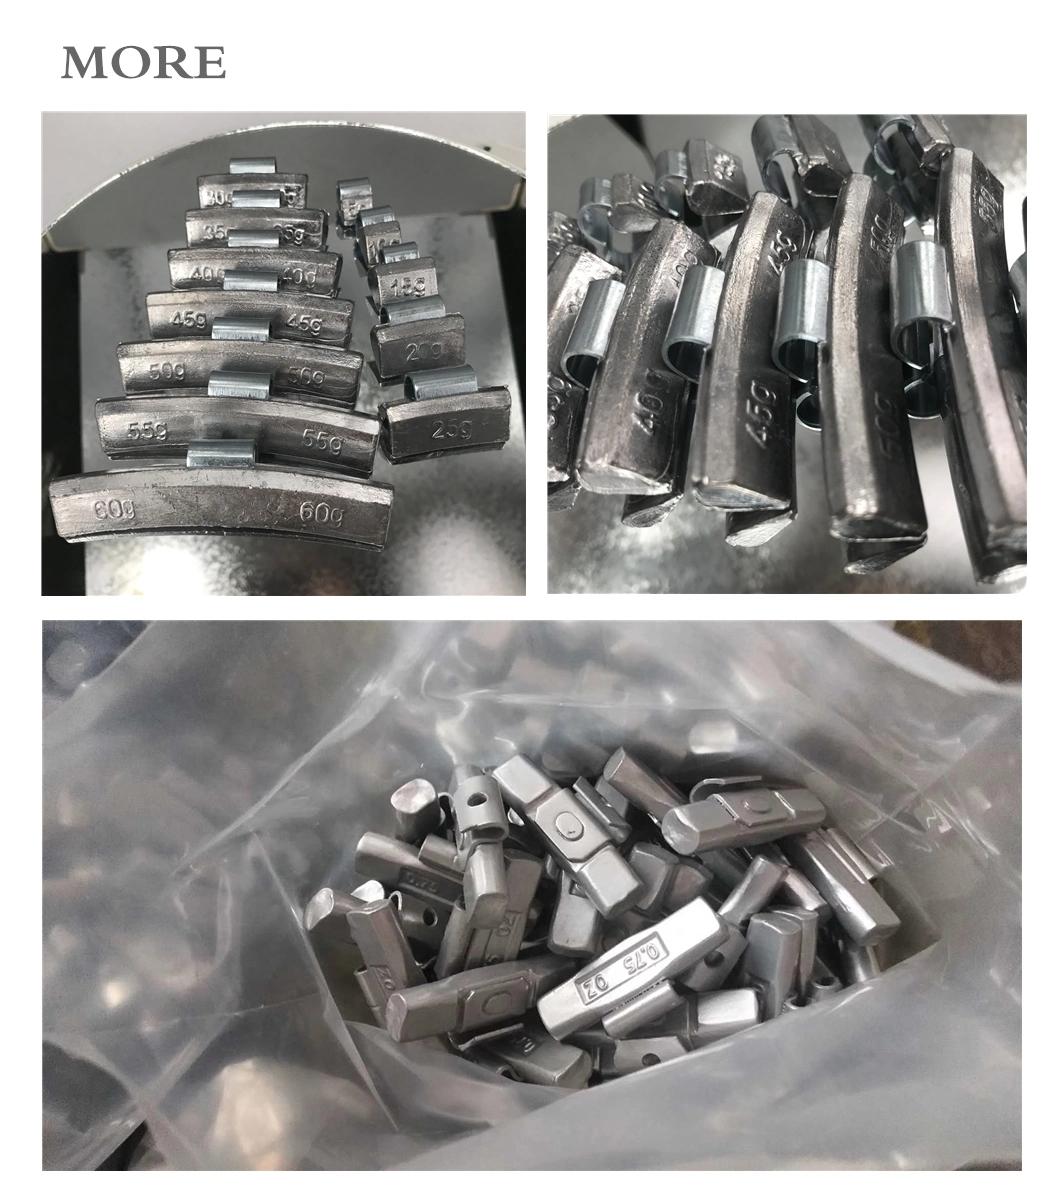 Zinc Material Tire Balancing Weight for Auto Parts